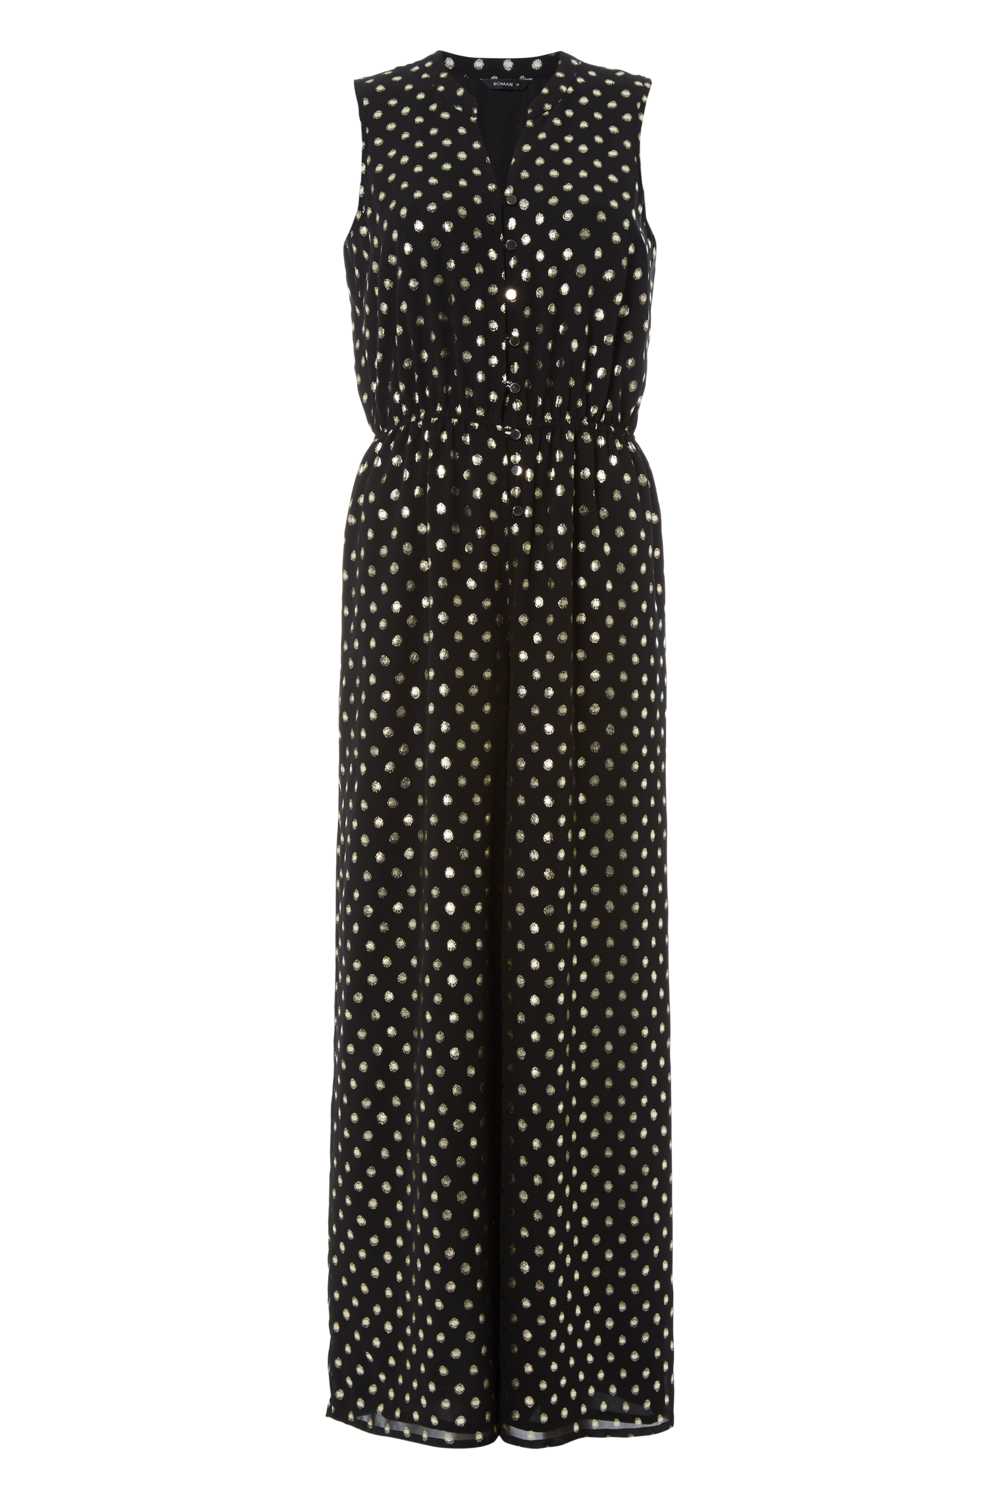 Gold Polka Dot Button Detail Jumpsuit, Image 4 of 4